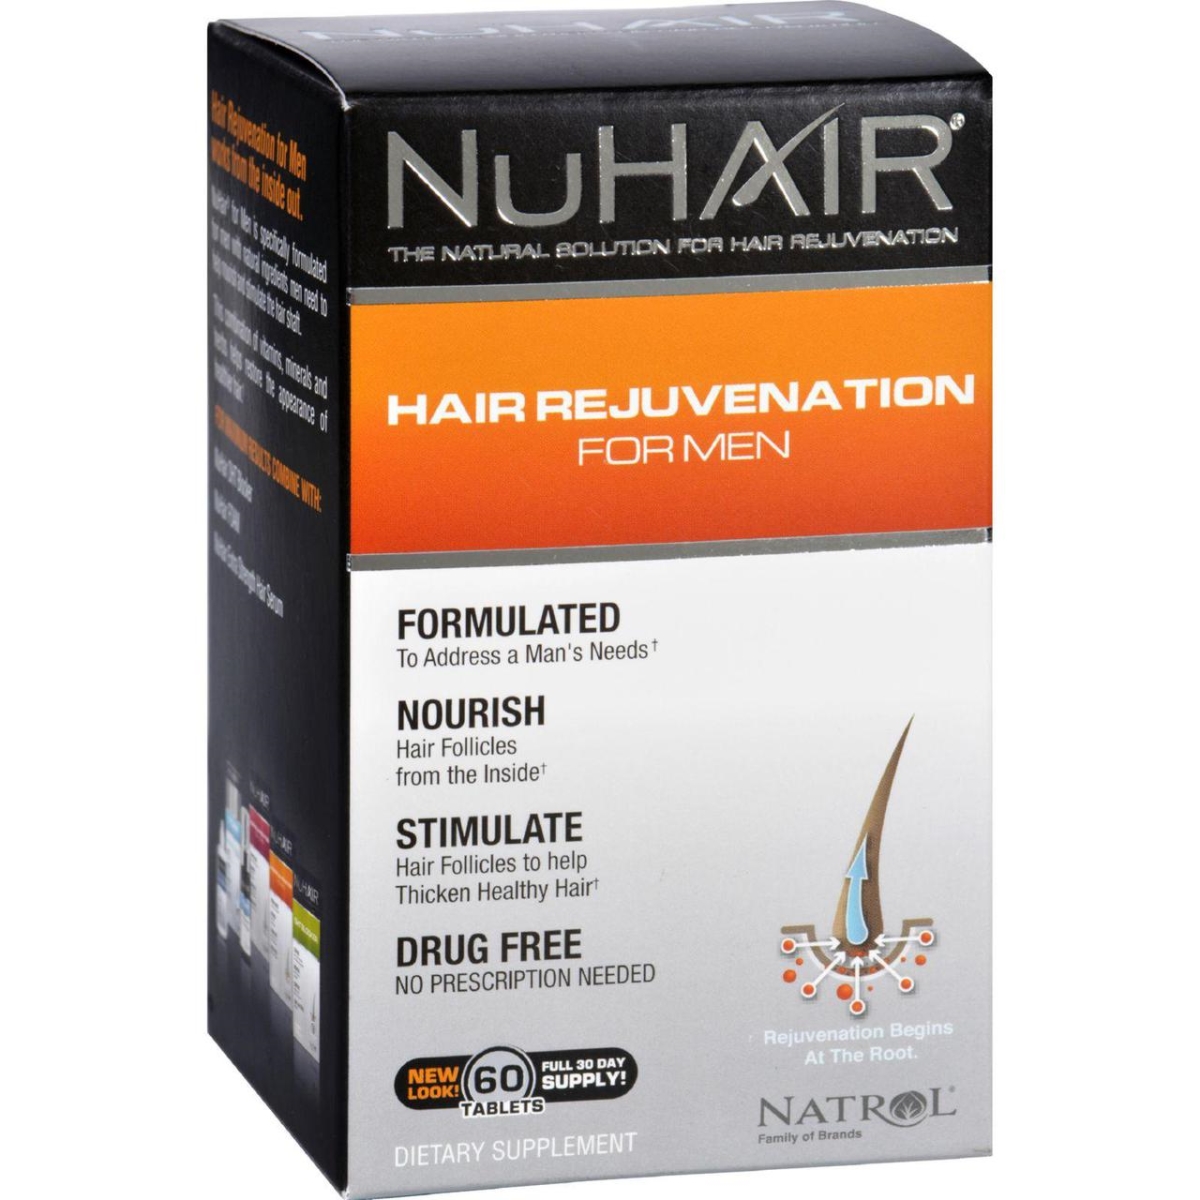 Hg1278977 Hair Regrowth For Men - 60 Tablets